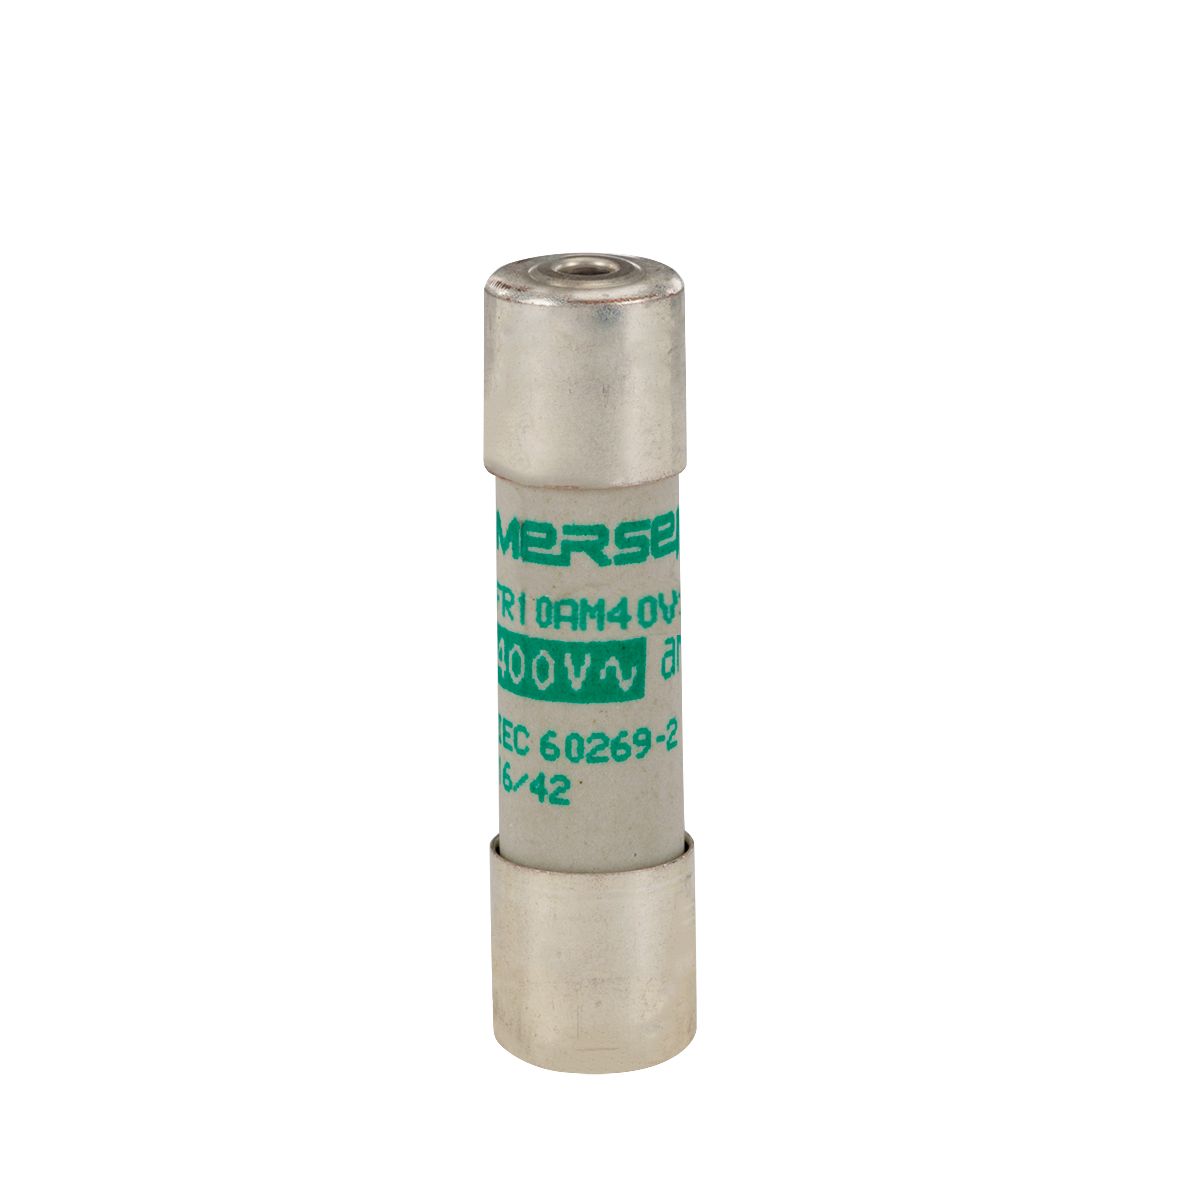 A084985 - Cylindrical fuse-link aM 400VAC 10.3x38, 8A with striker